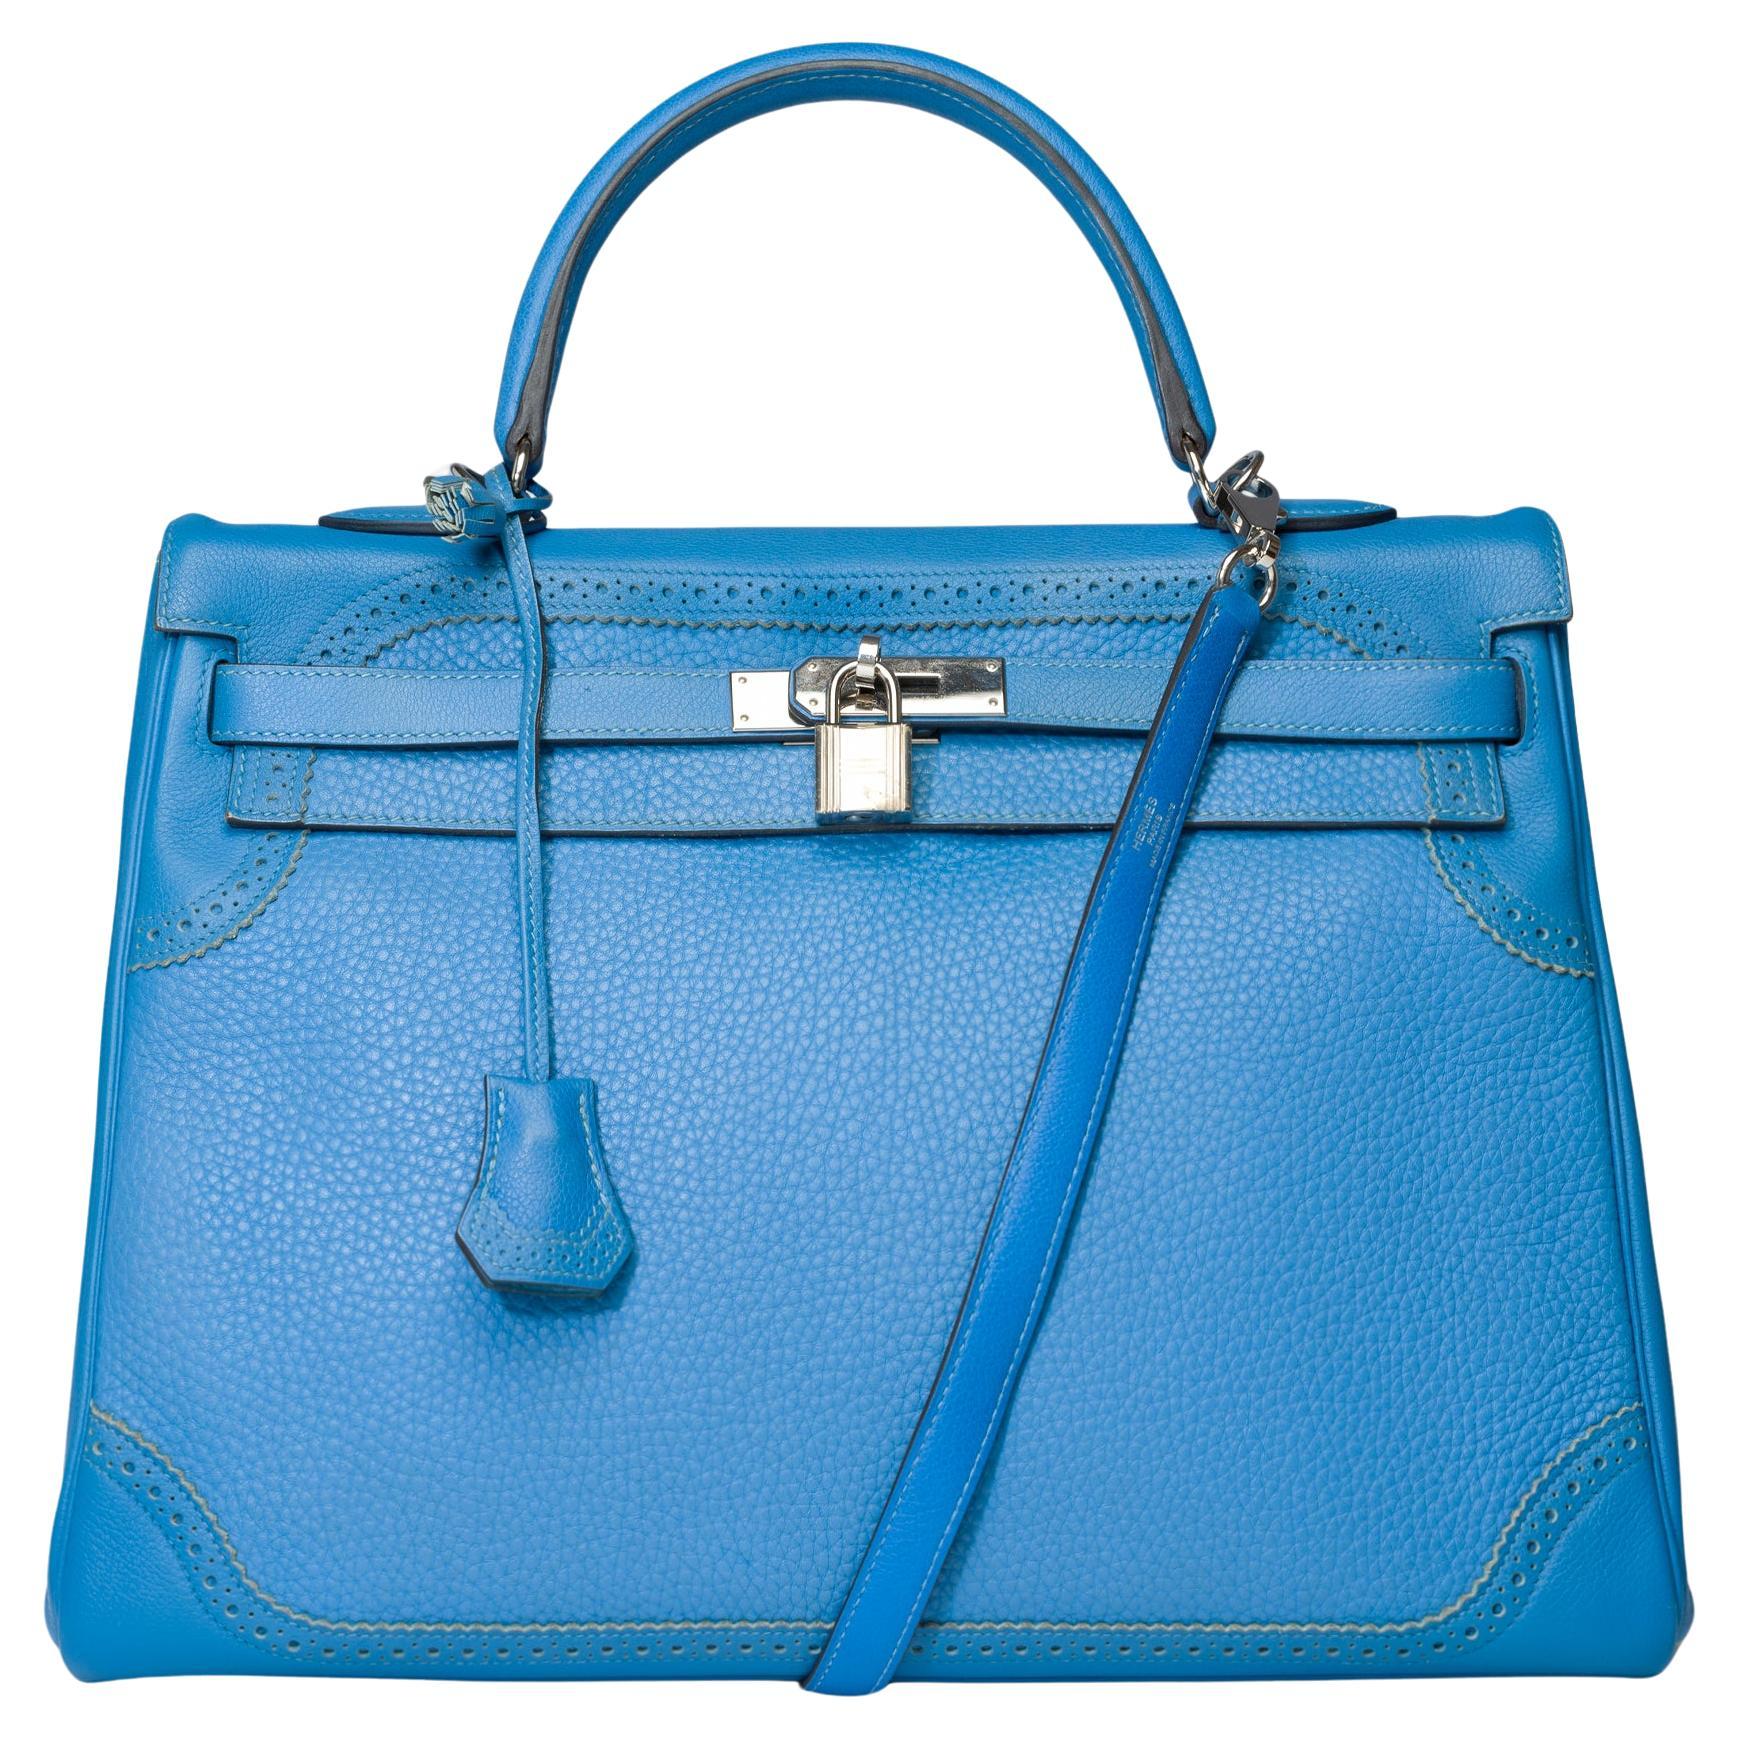 Hermès Kelly 35 "Ghillies" handbag strap in Paradis Blue Togo/Swift leather, SHW For Sale